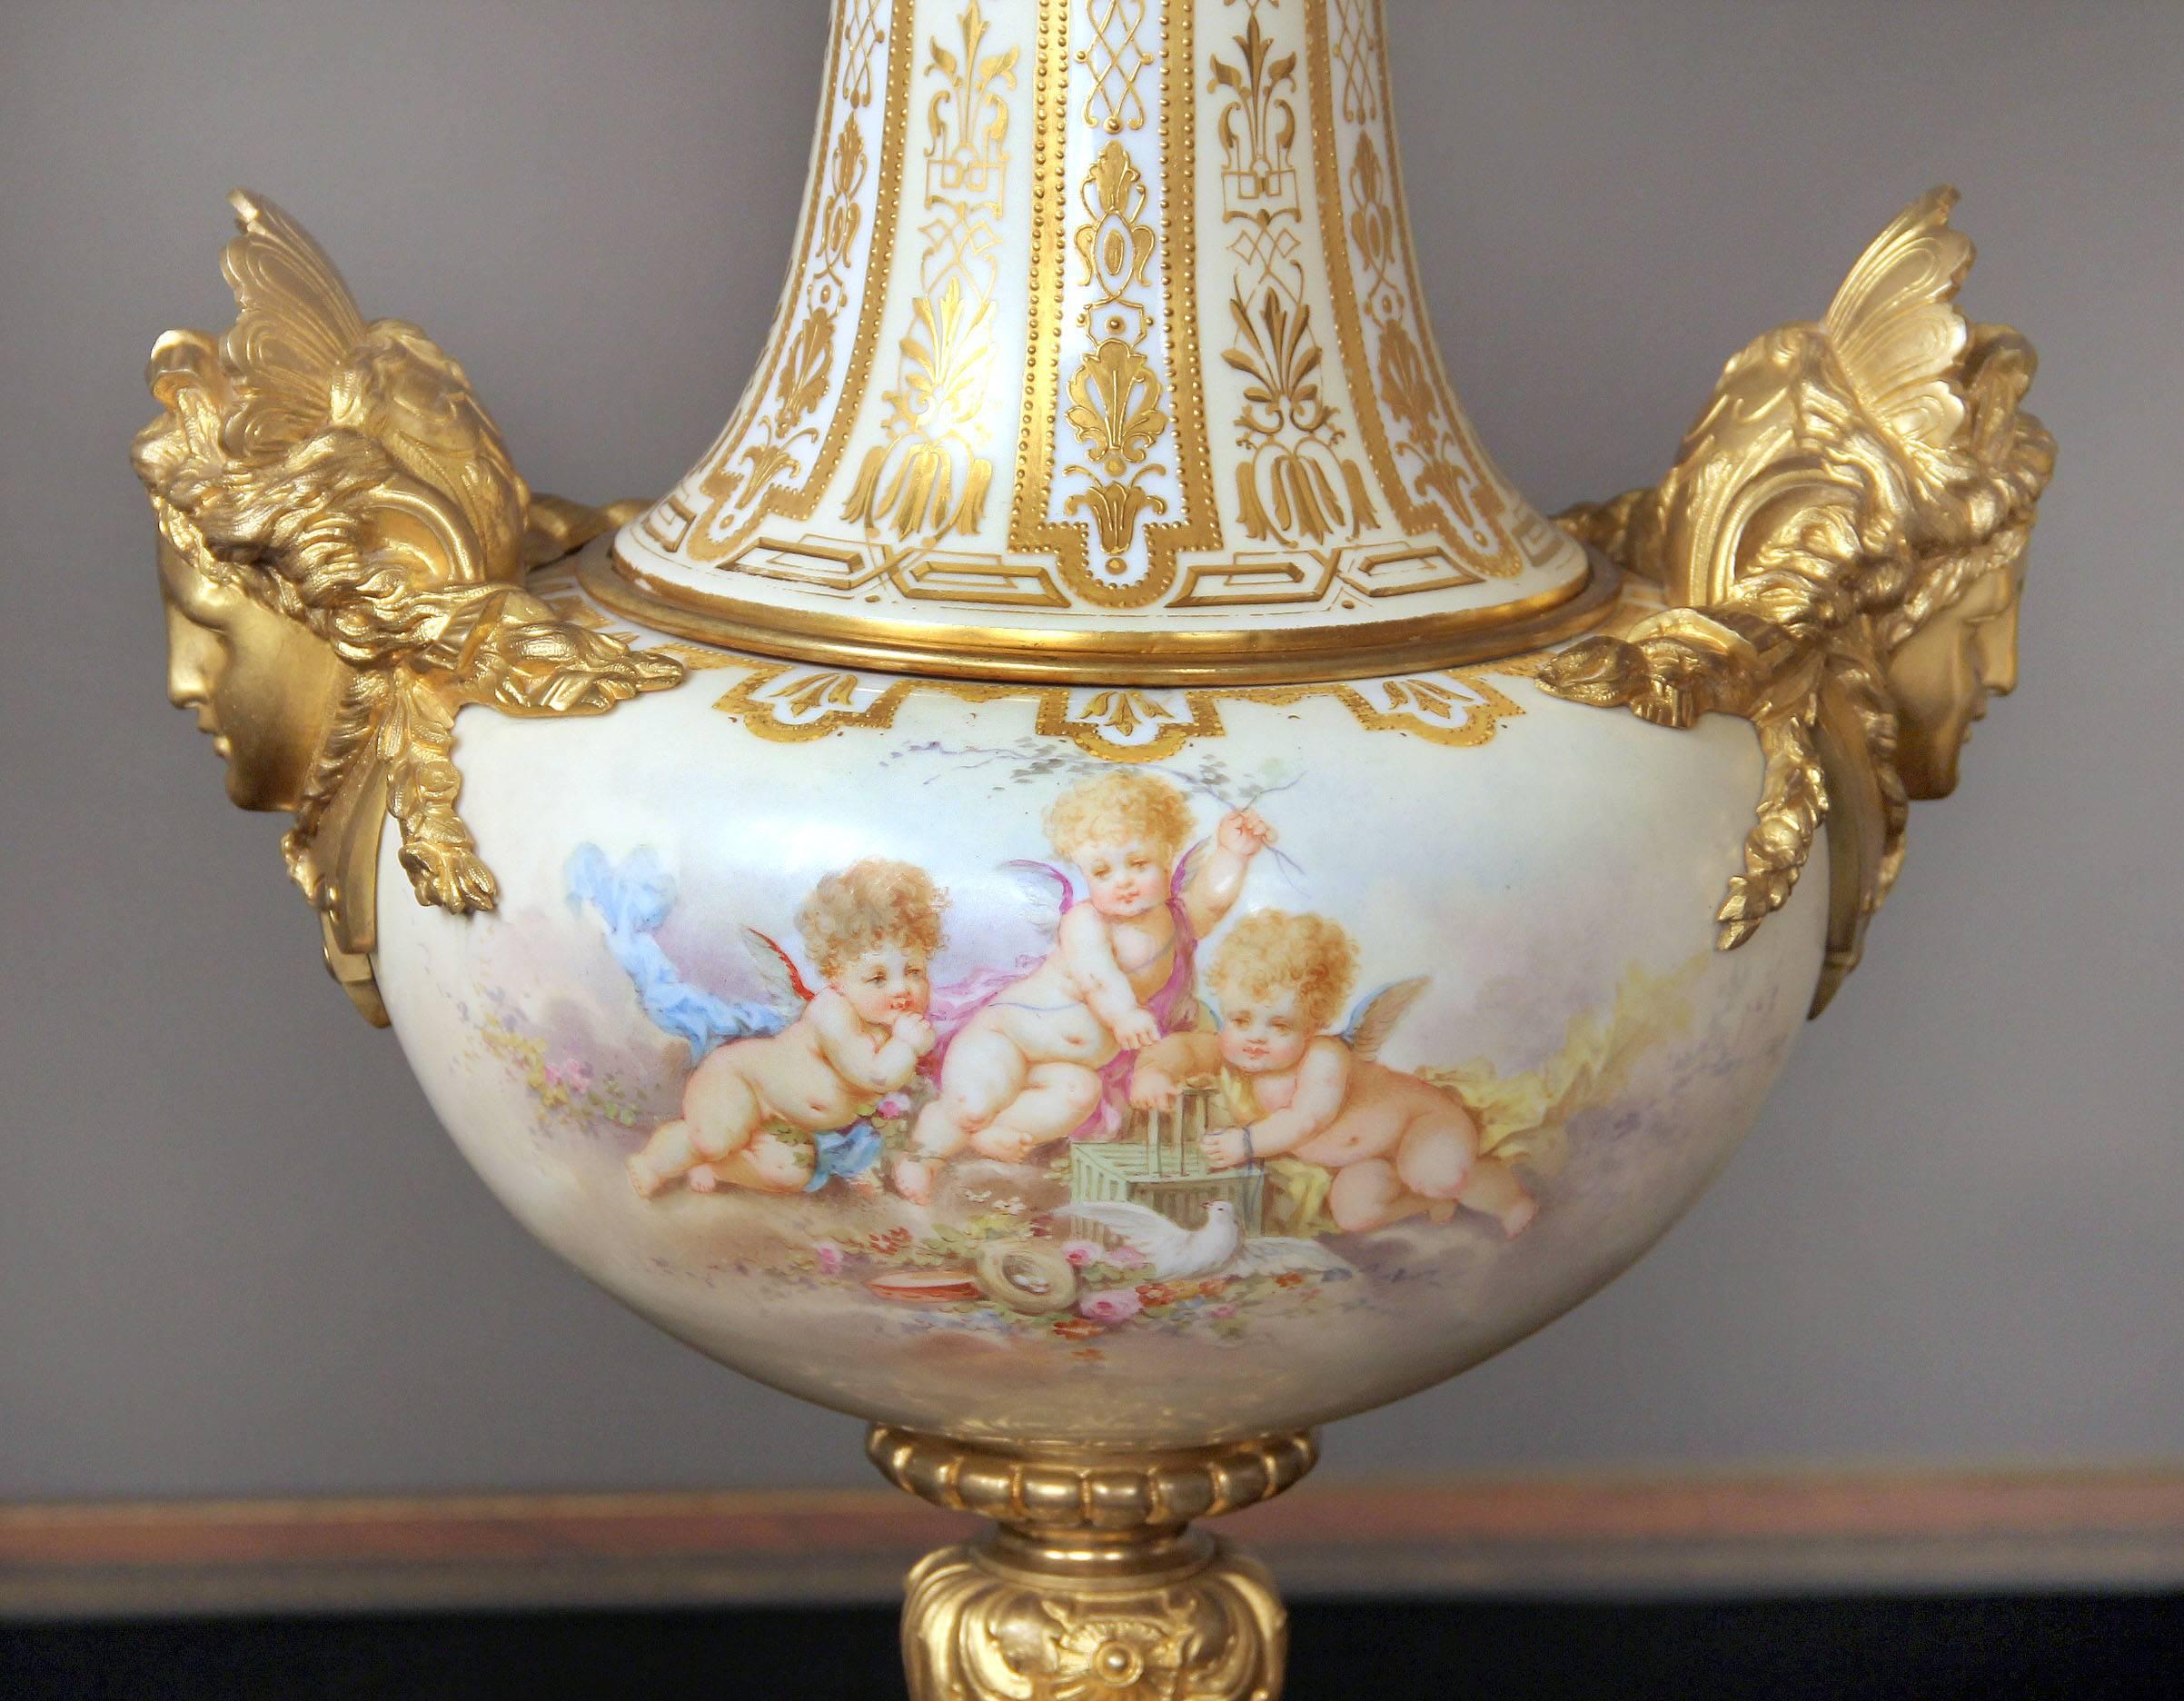 A beautiful pair of late 19th century gilt bronze and champlevé enamel mounted white Sèvres style vases

Gilt bronze tops above a long neck with raised gold designs. The painted fronts each with scenes of cherubs, flowers, birds and fruit, the